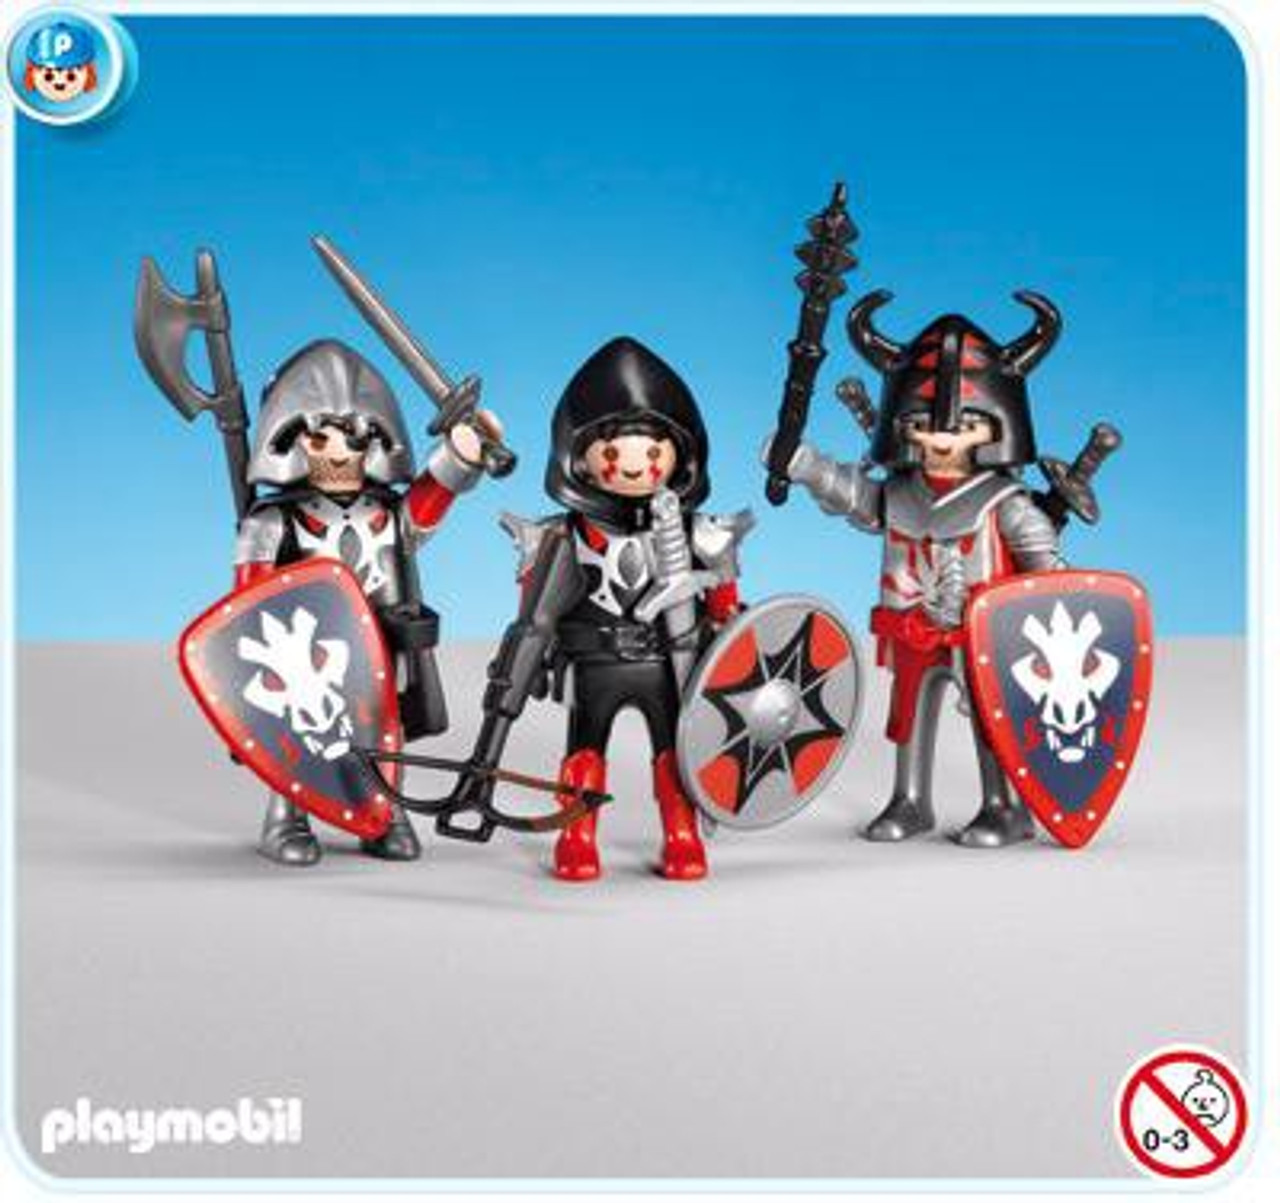 Playmobil Dragon Land 3 Red Dragon Knights Set 7975 Toywiz - roblox dungeon quest red knight armor roblox dominus generator